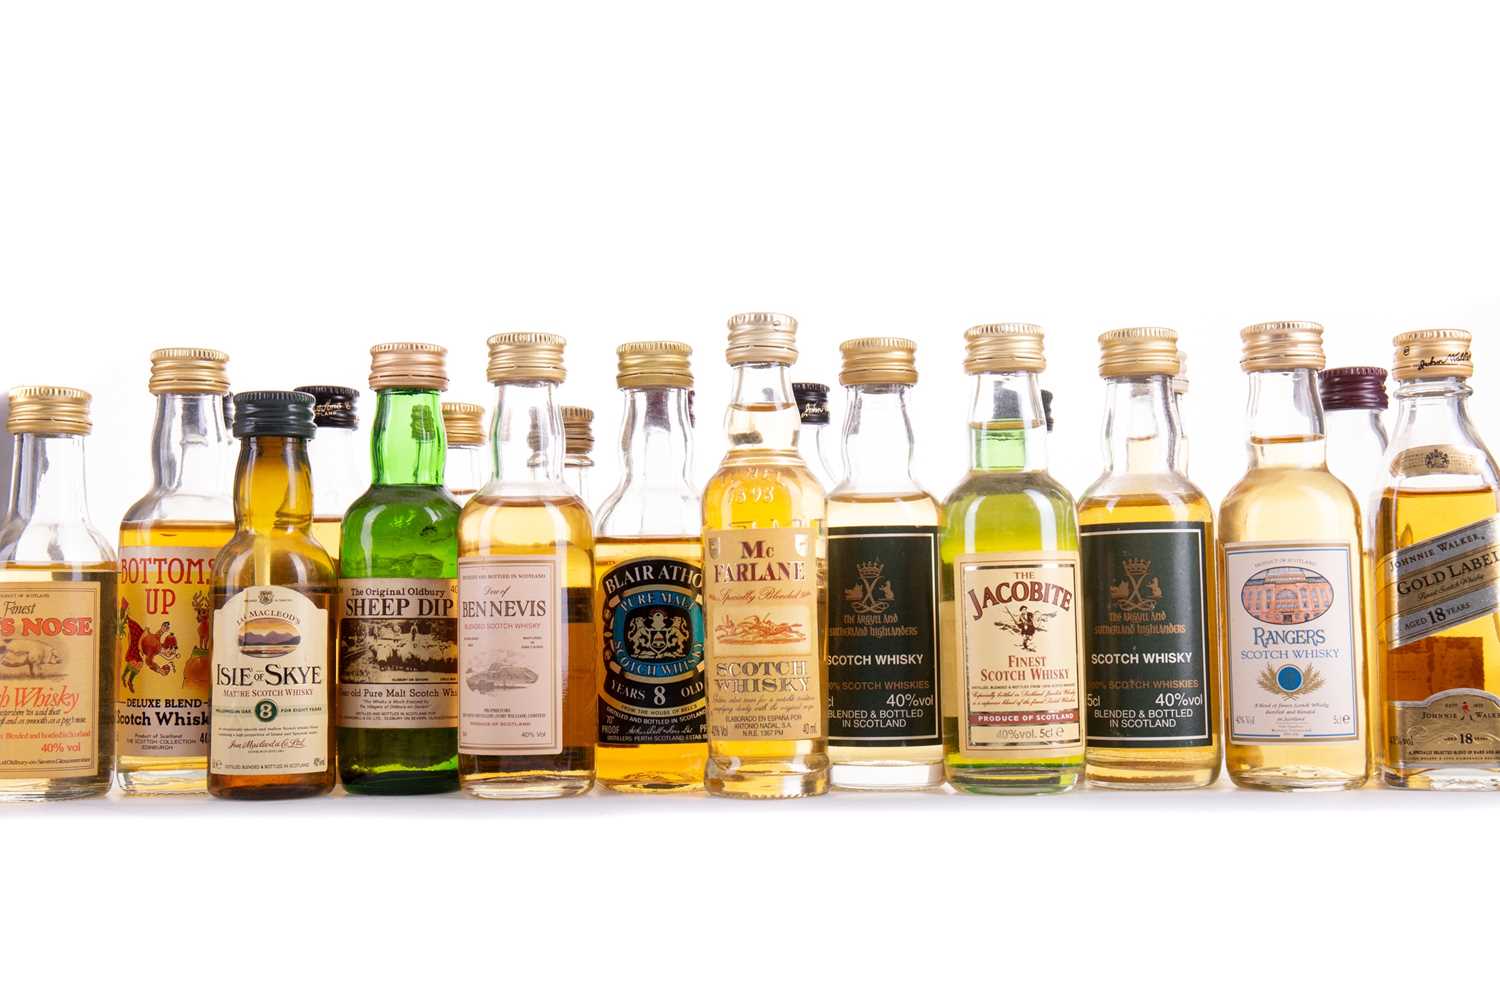 Lot 77 - 40 ASSORTED WHISKY MINIATURES - INCLUDING BLAIR ATHOL 8 YEAR OLD